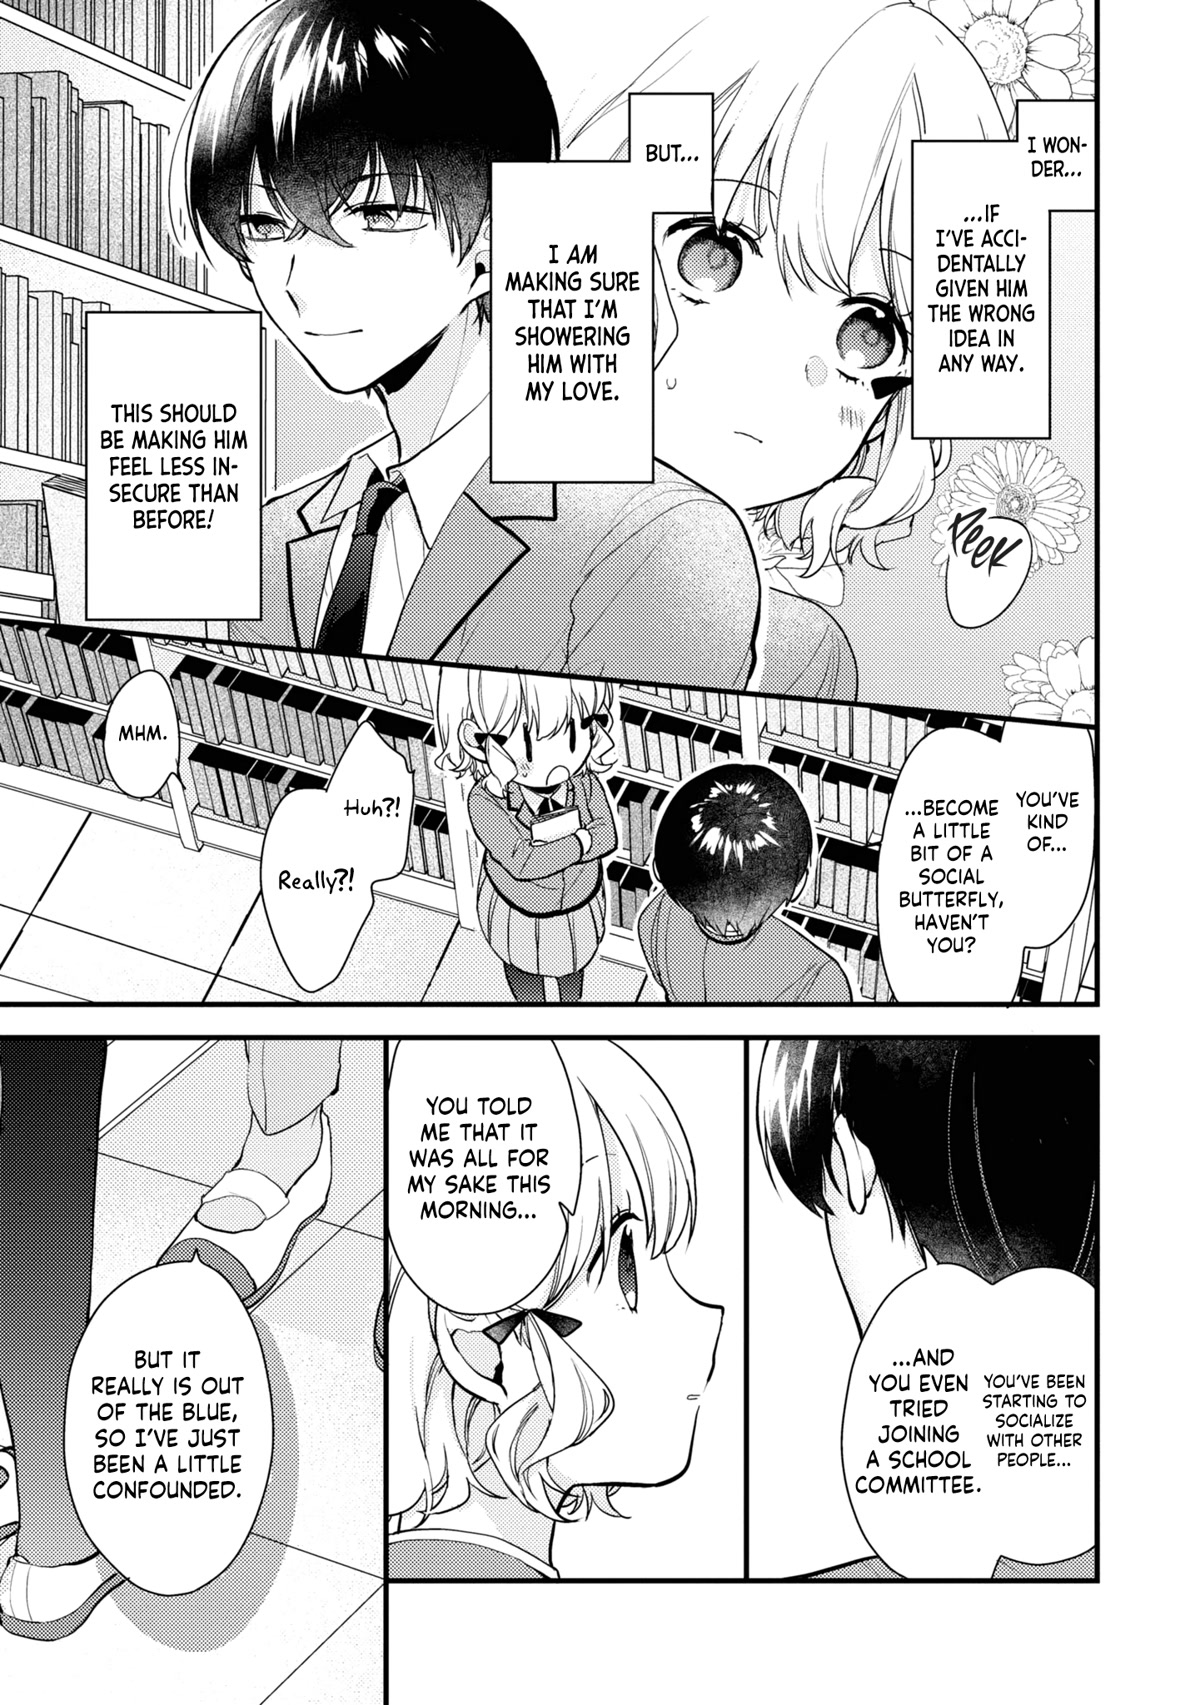 I Have A Second Chance At Life, So I’Ll Pamper My Yandere Boyfriend For A Happy Ending!! Chapter 3 #23